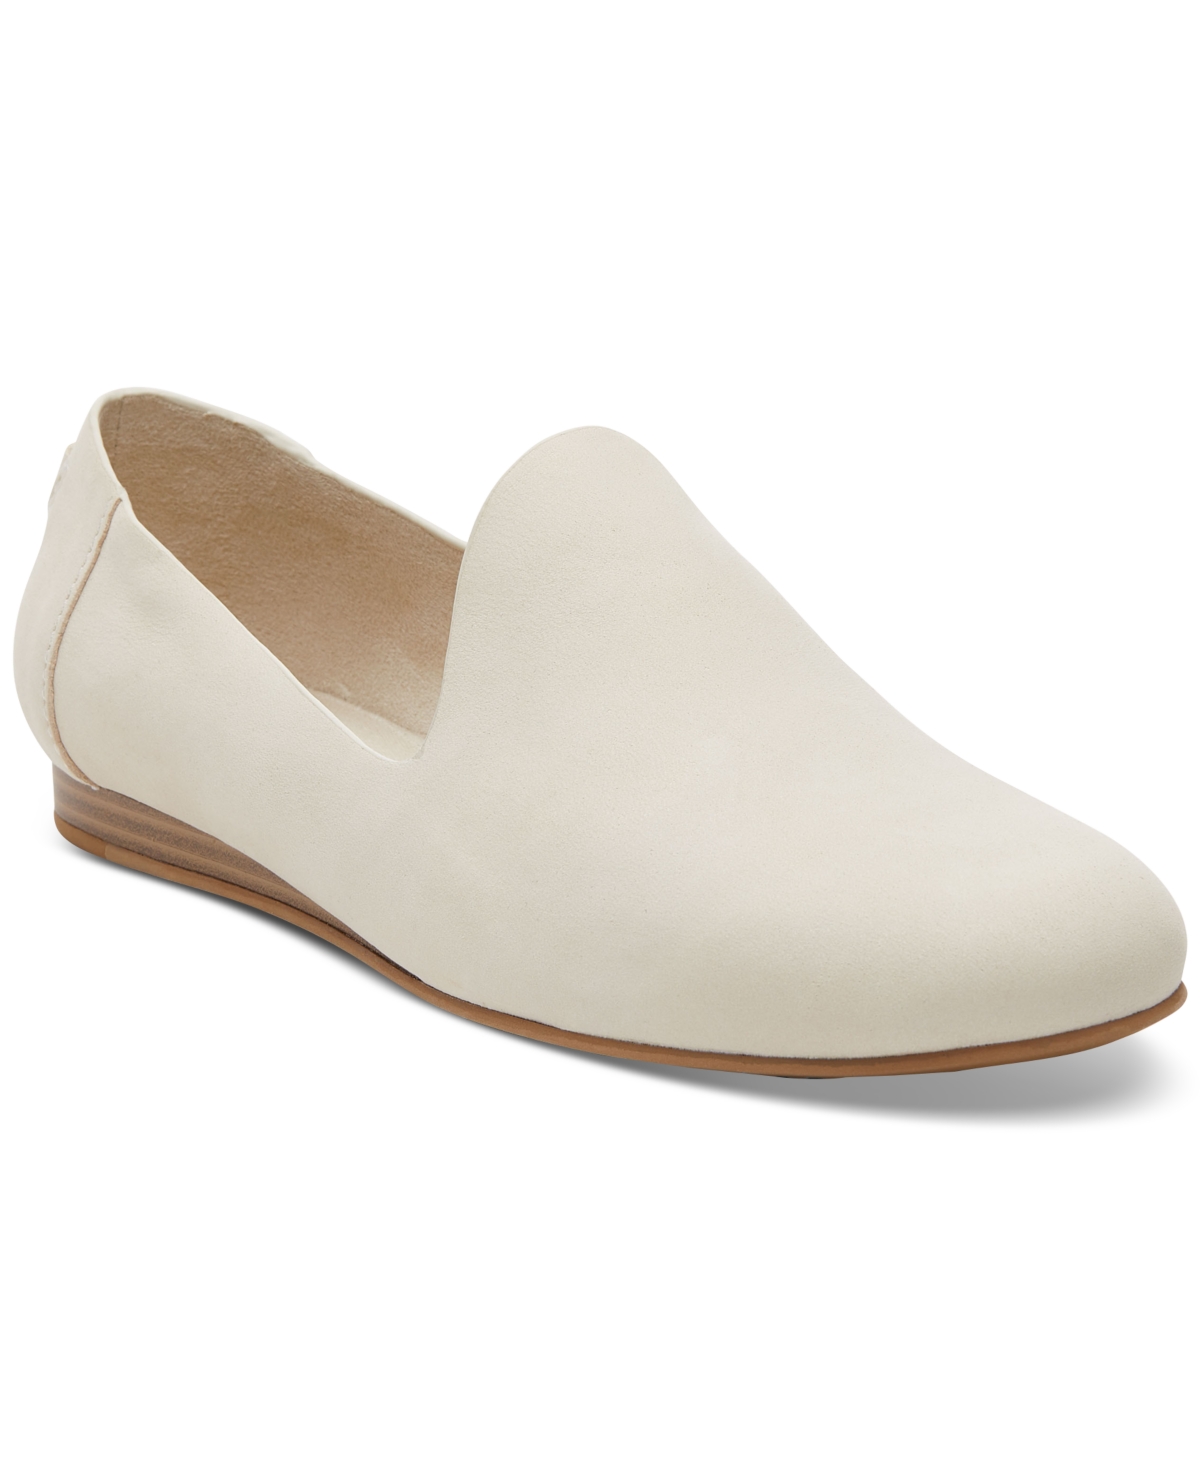 TOMS WOMEN'S DARCY SLIP-ON LOAFERS